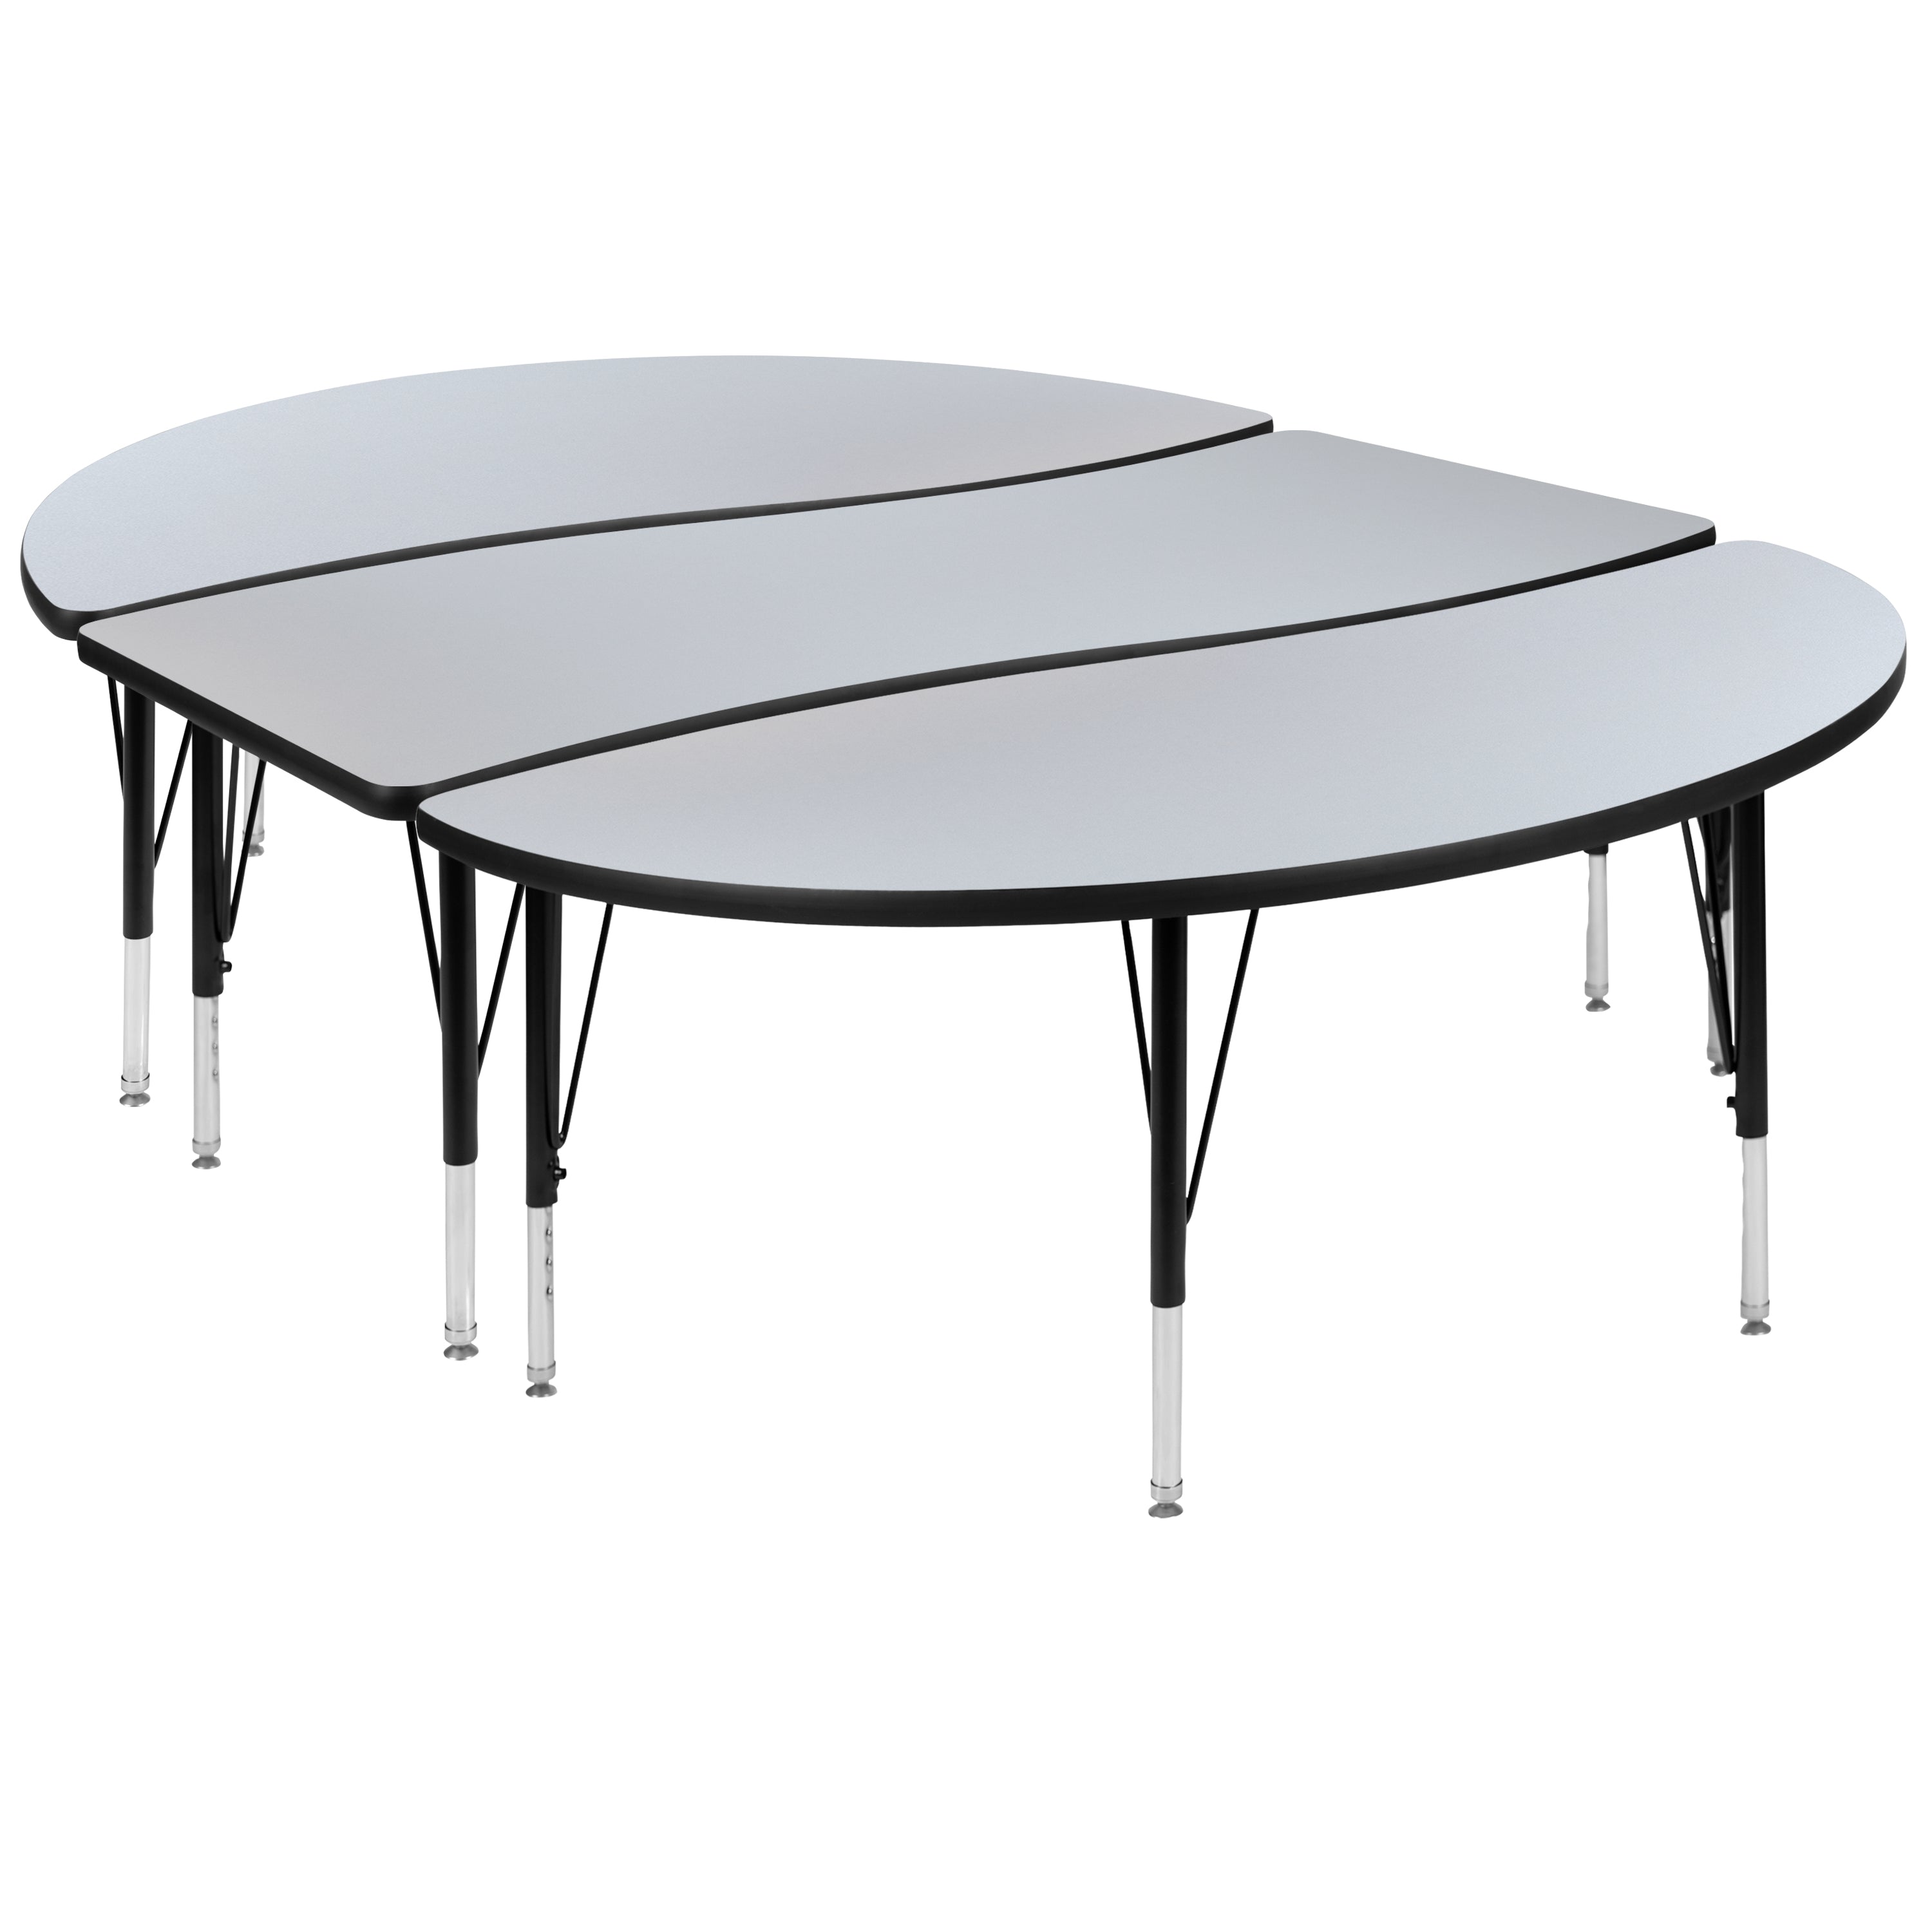 3 Piece 86" Oval Wave Flexible Grey Thermal Laminate Activity Table Set - Height Adjustable Short Legs-Collaborative Activity Table Set-Flash Furniture-Wall2Wall Furnishings